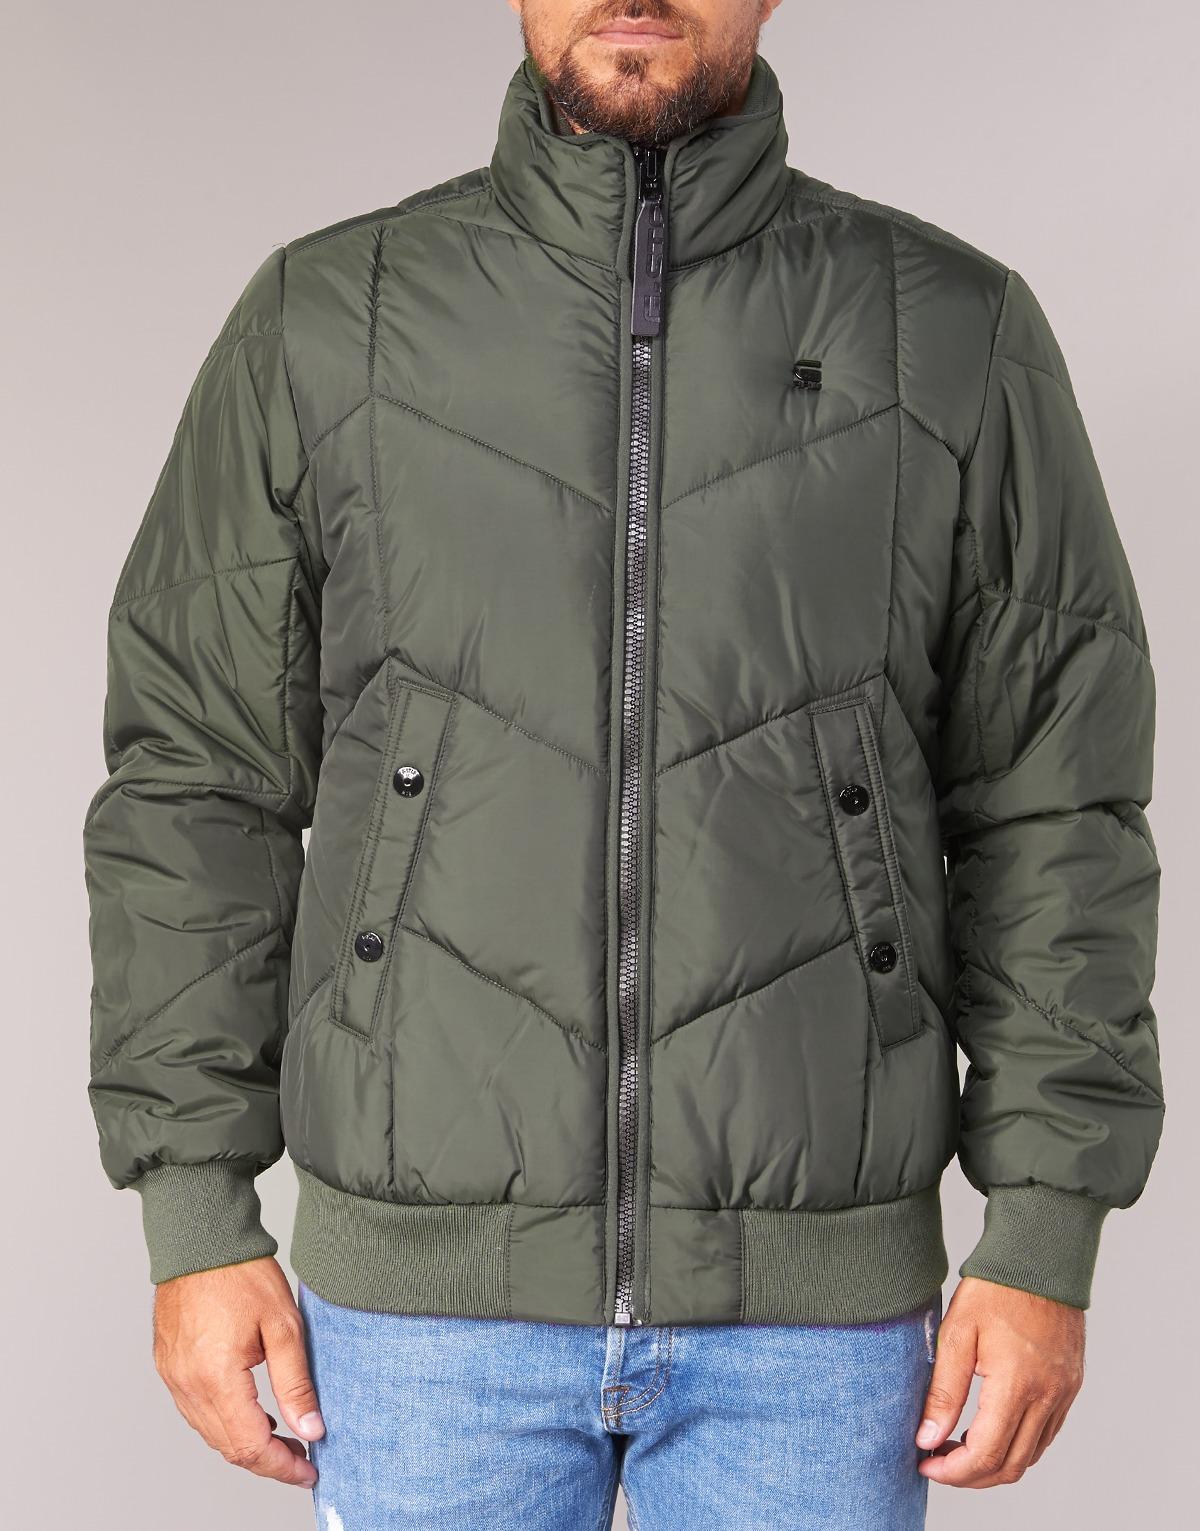 G-Star RAW Whistler Meefic Quilted Bomber Jacket in Green for Men - Lyst